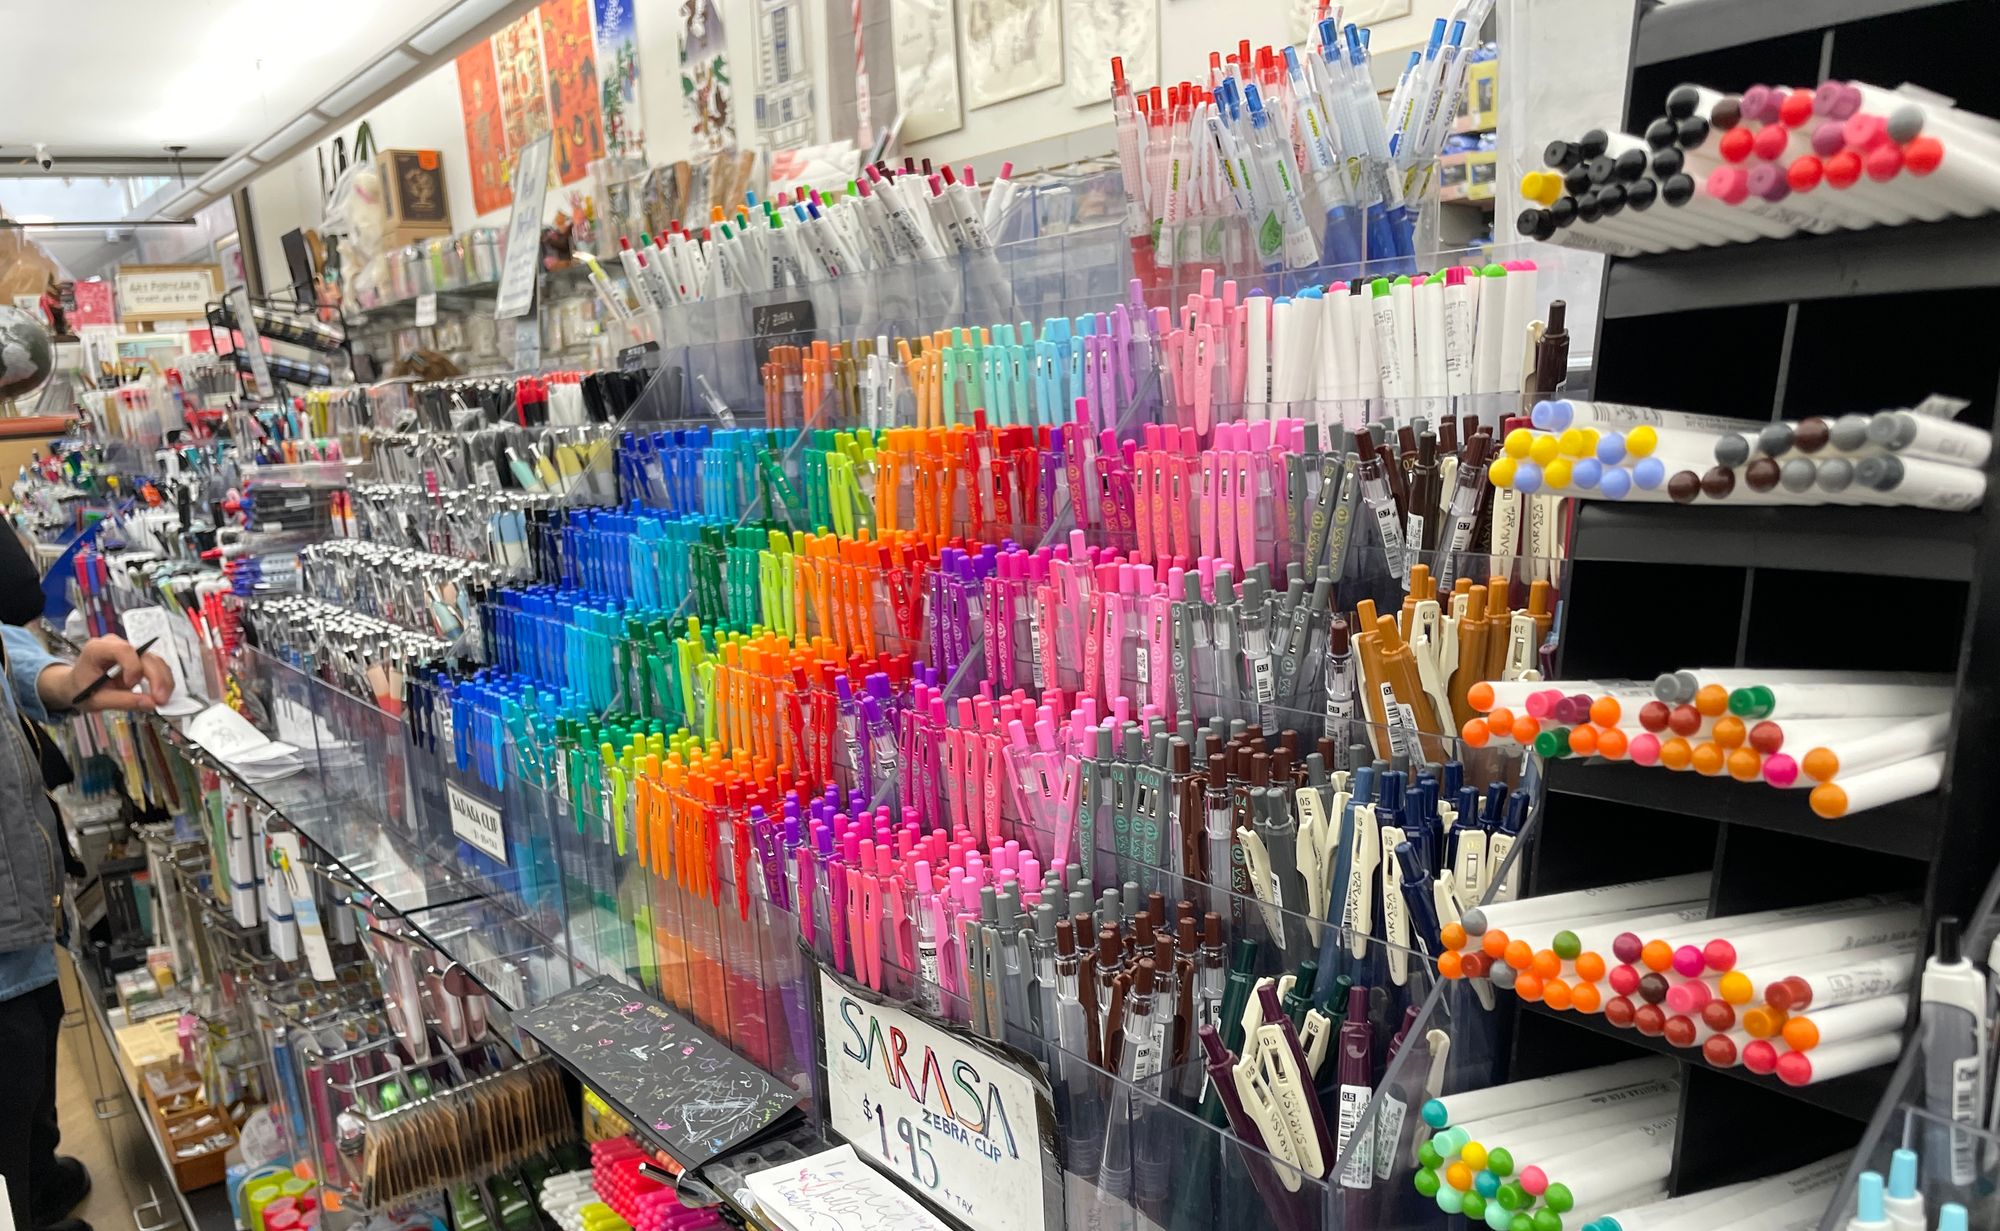 The Museum of Office Supplies is Coming to San Francisco  Bright  stationery, Stationery items, Stationery supplies